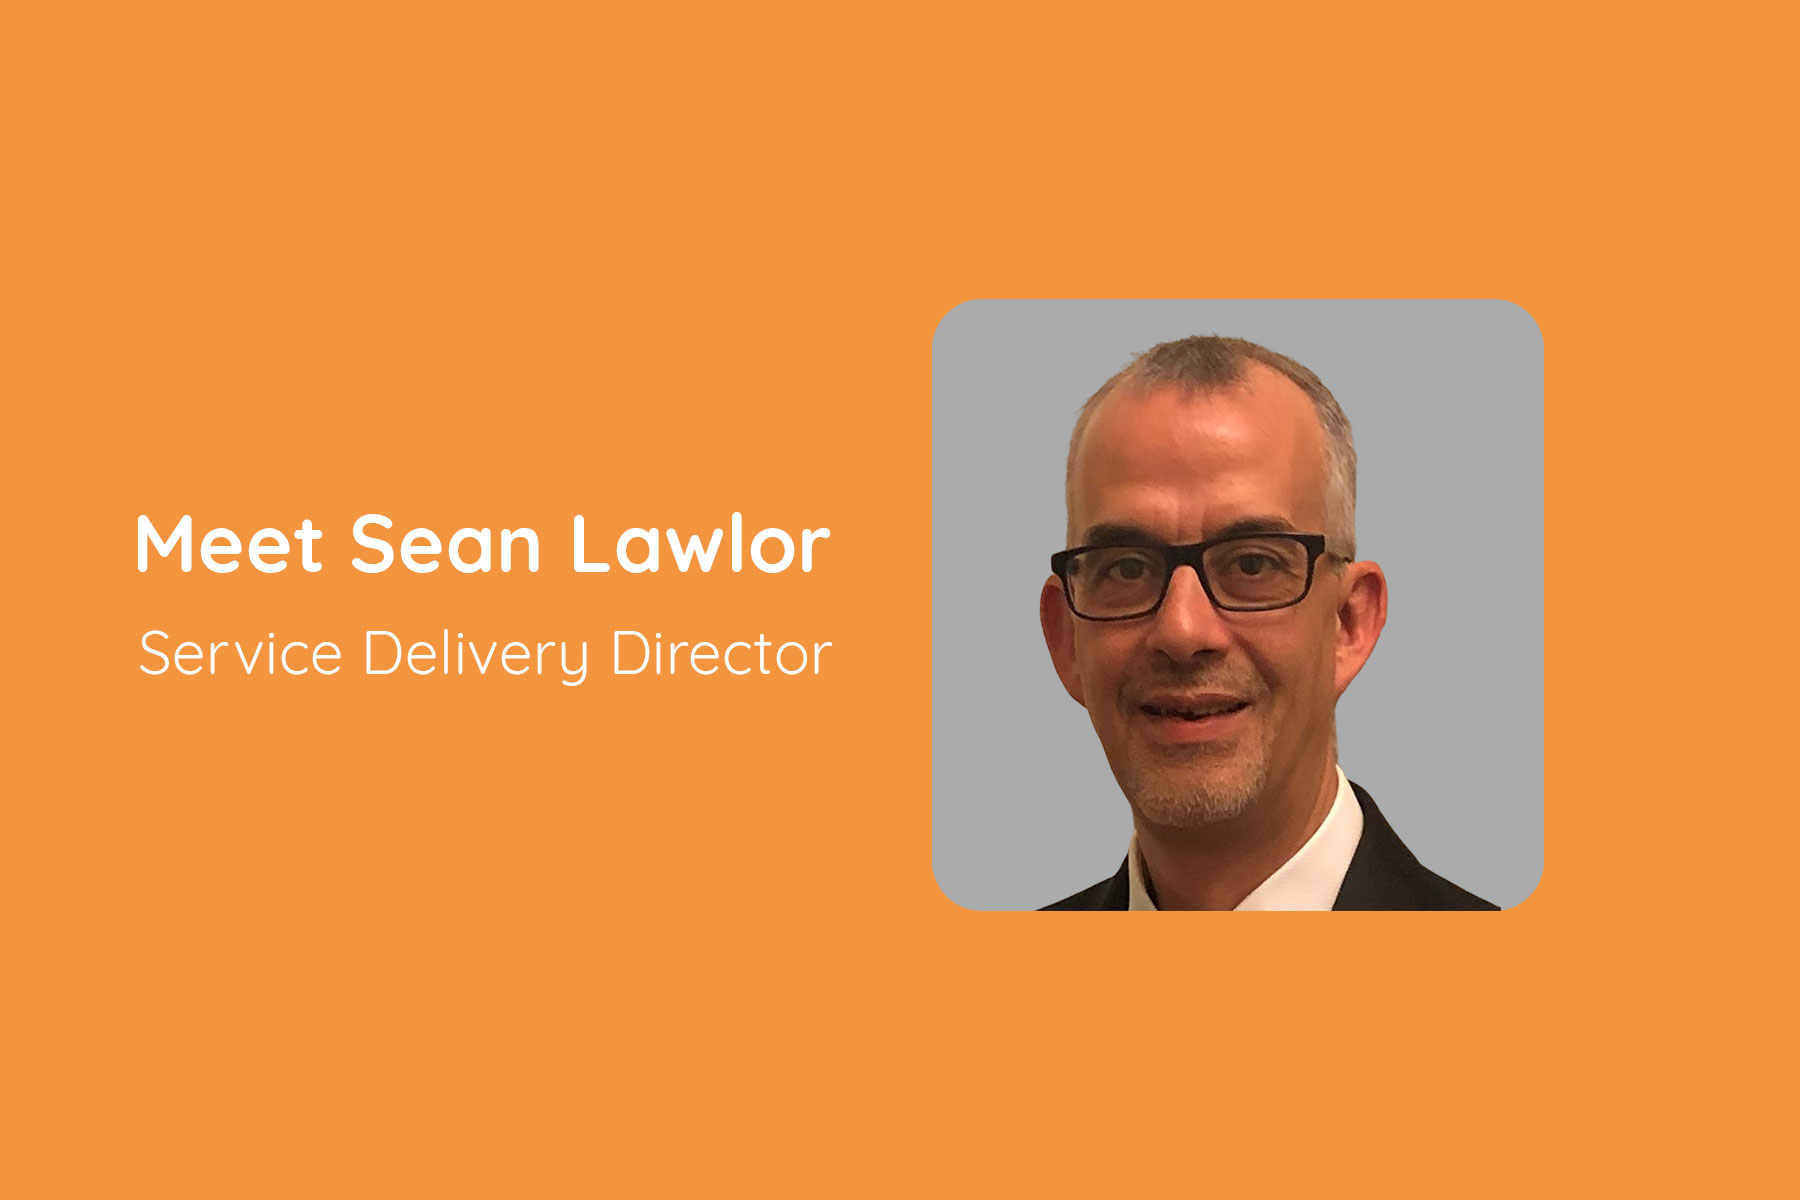 mmi welcomes Sean Lawlor as Service Delivery Director